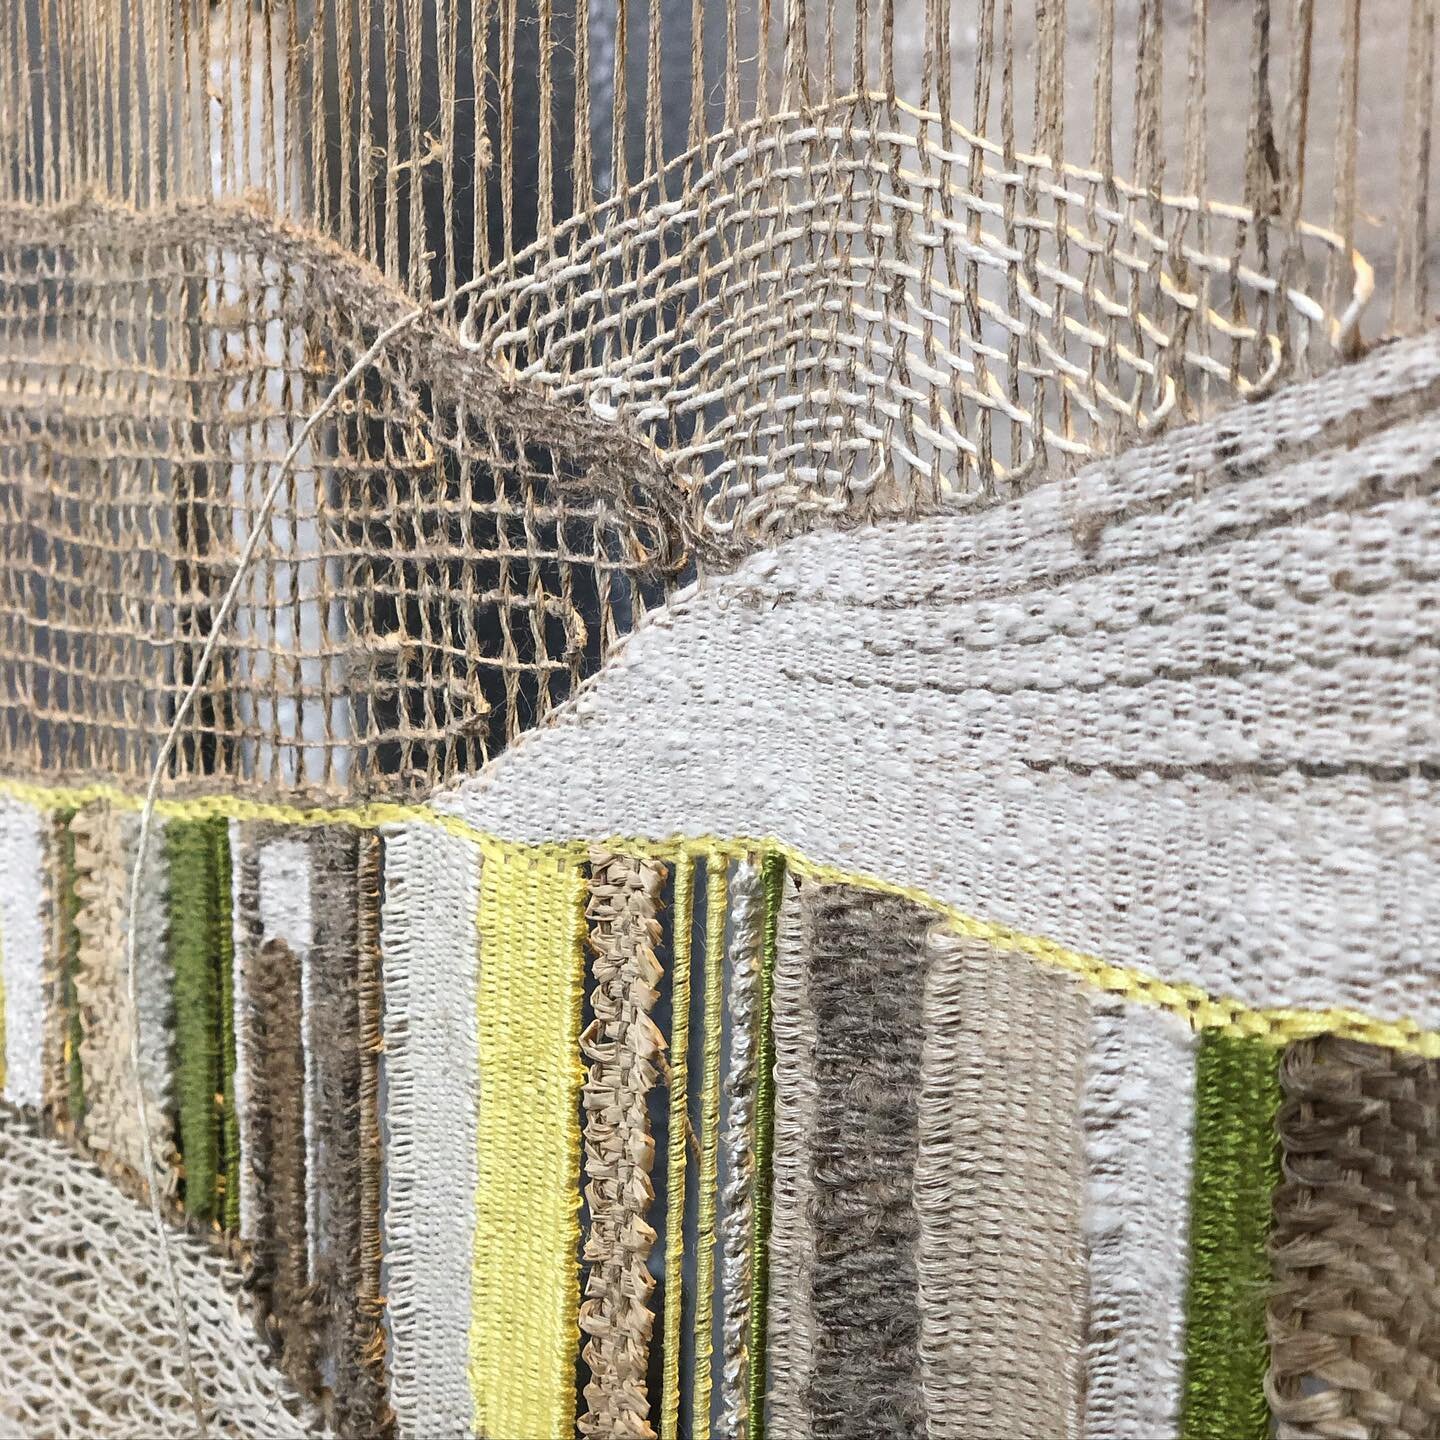 &lsquo;Hope&rsquo;
A very special commission in progress. Immensely enjoyed weaving with raffia, hand spun nettle and hemp...

In these uncertain times I have found refuge in my work. The studio has become my second home, away from the chaos of the w